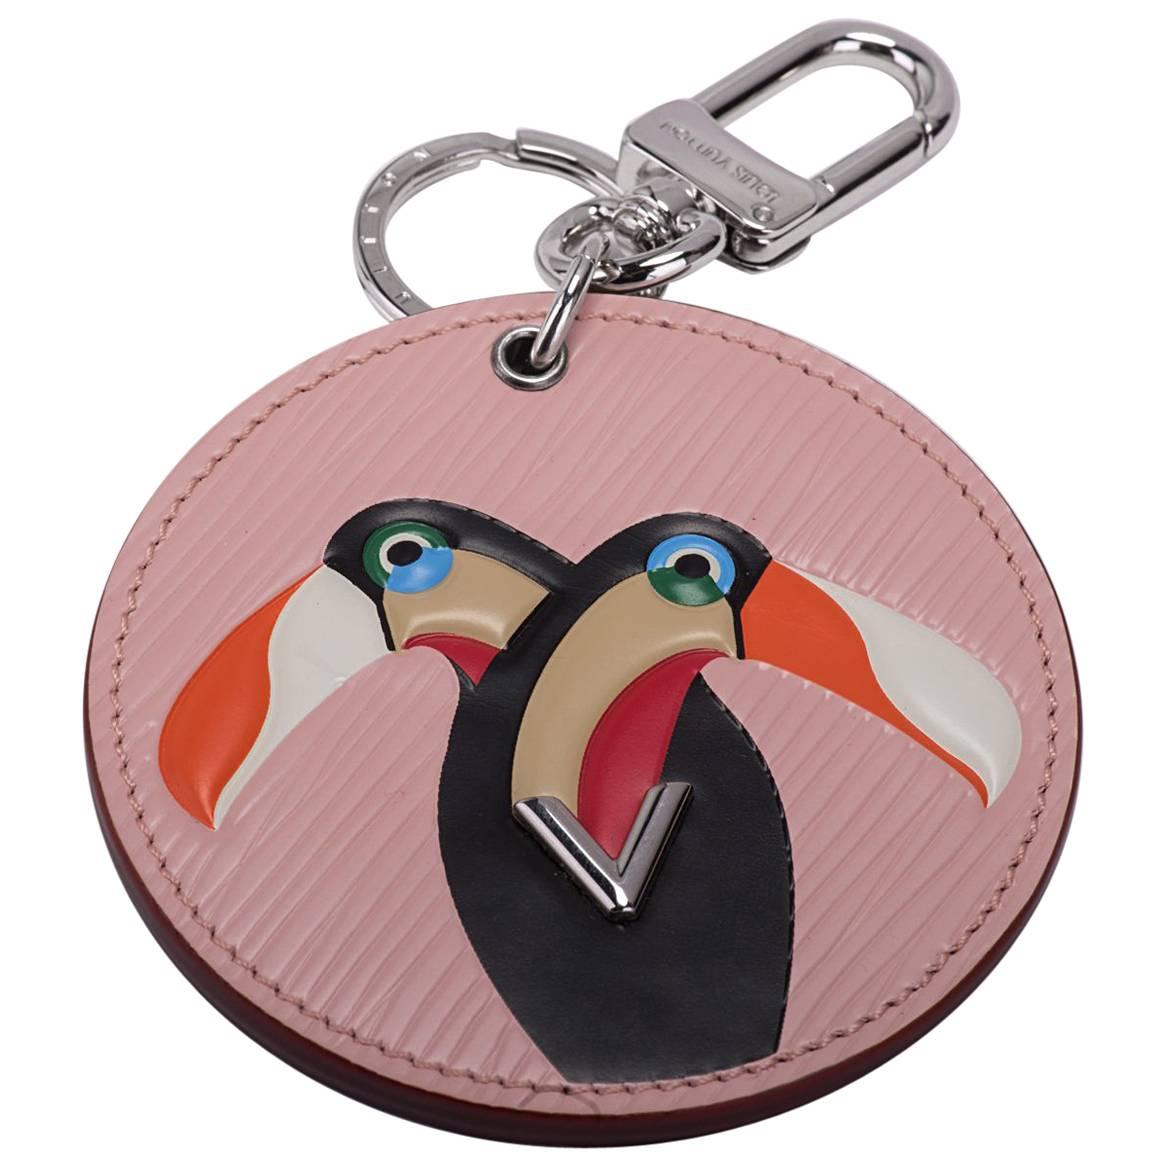 Vuitton Limited Edition Pink Toucan Bag Charm